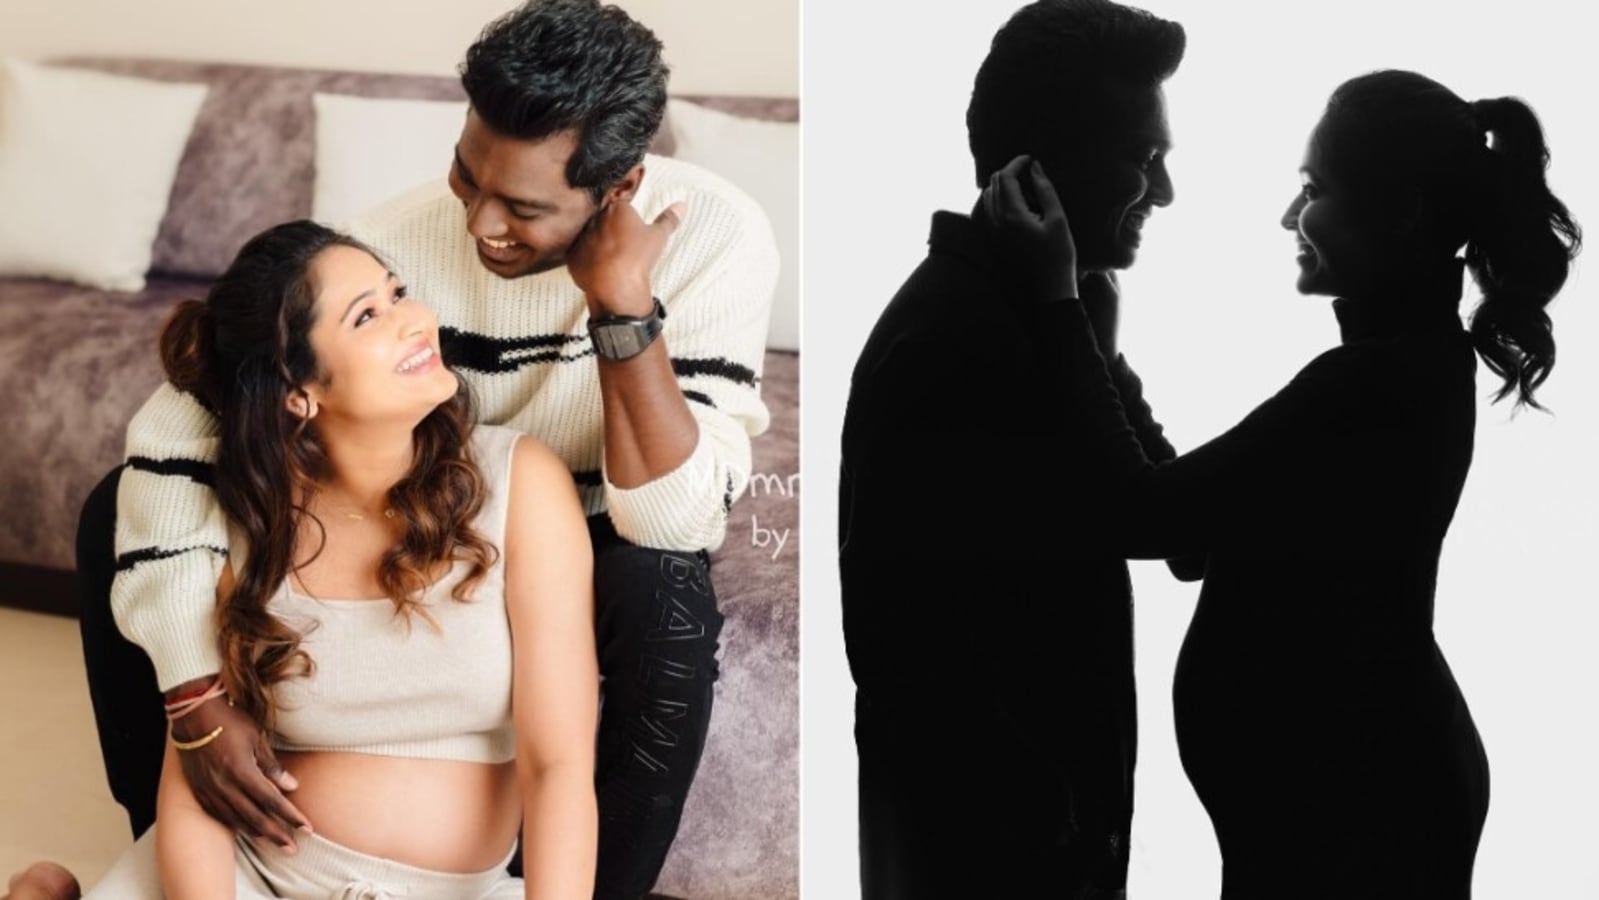 Jawan director Atlee and wife Priya expecting first child, share post